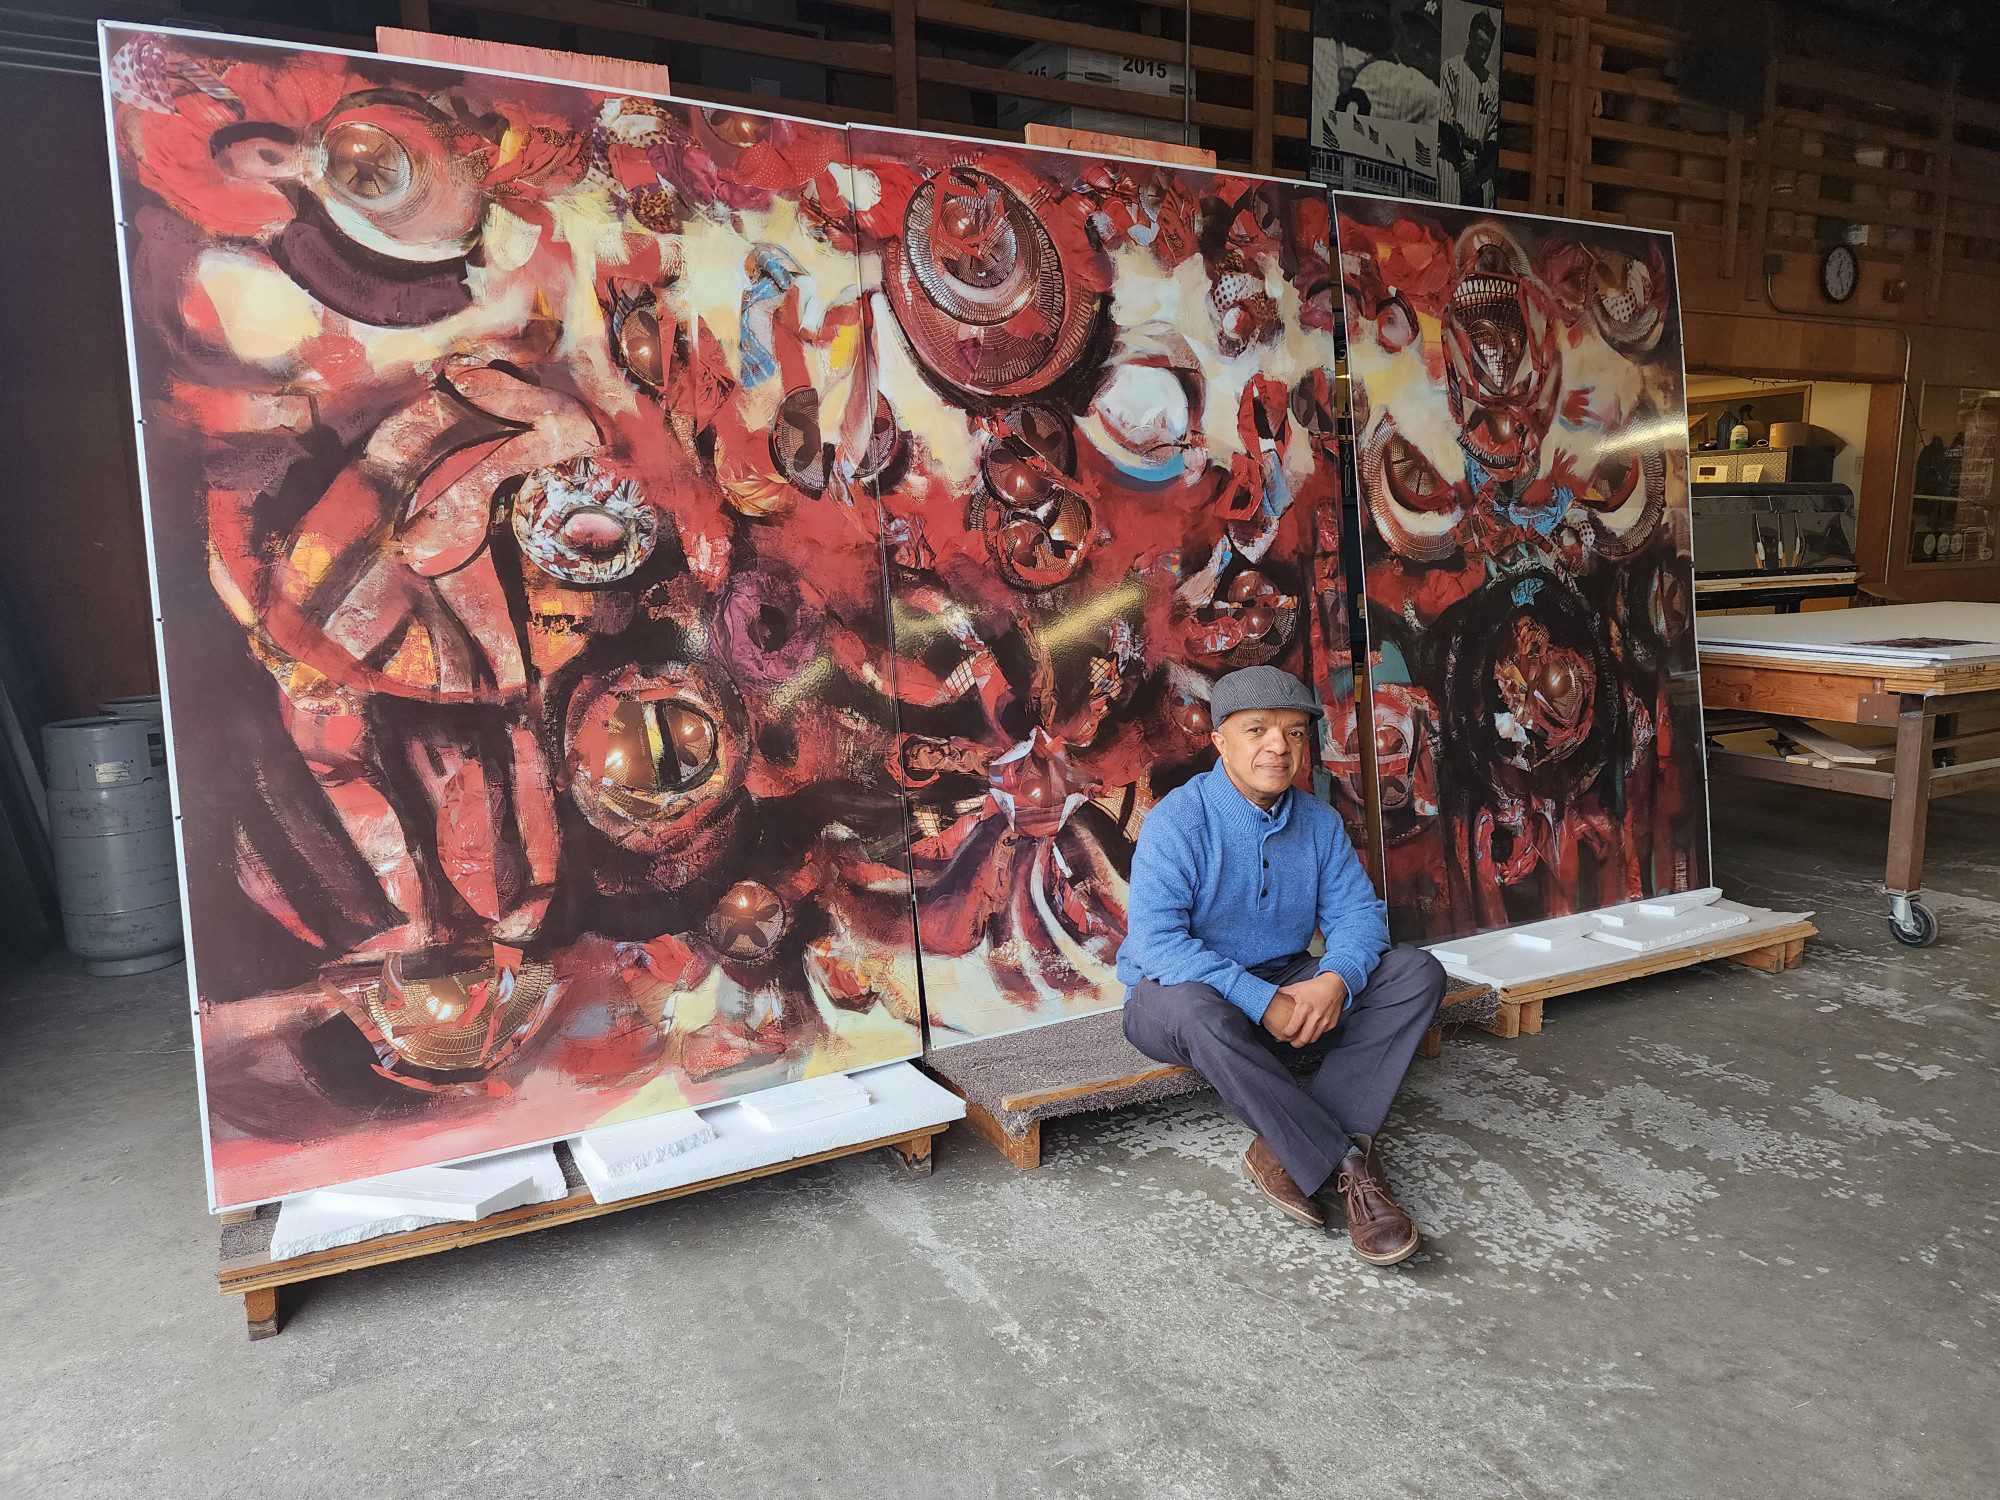 Man sits in front of large red abstract painting